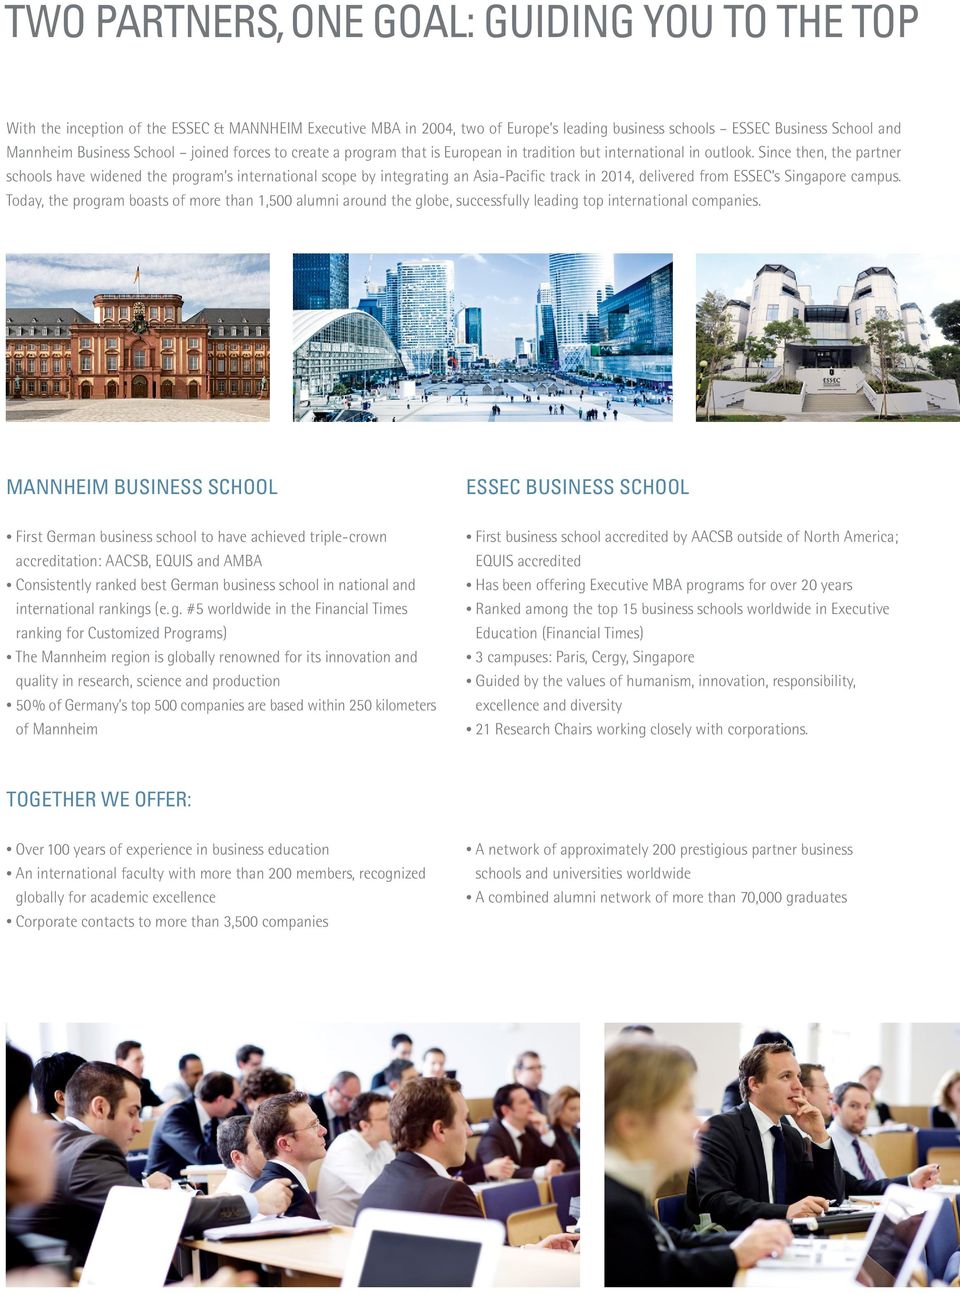 Since then, the partner schools have widened the program s international scope by integrating an Asia-Pacific track in 2014, delivered from ESSEC s Singapore campus.